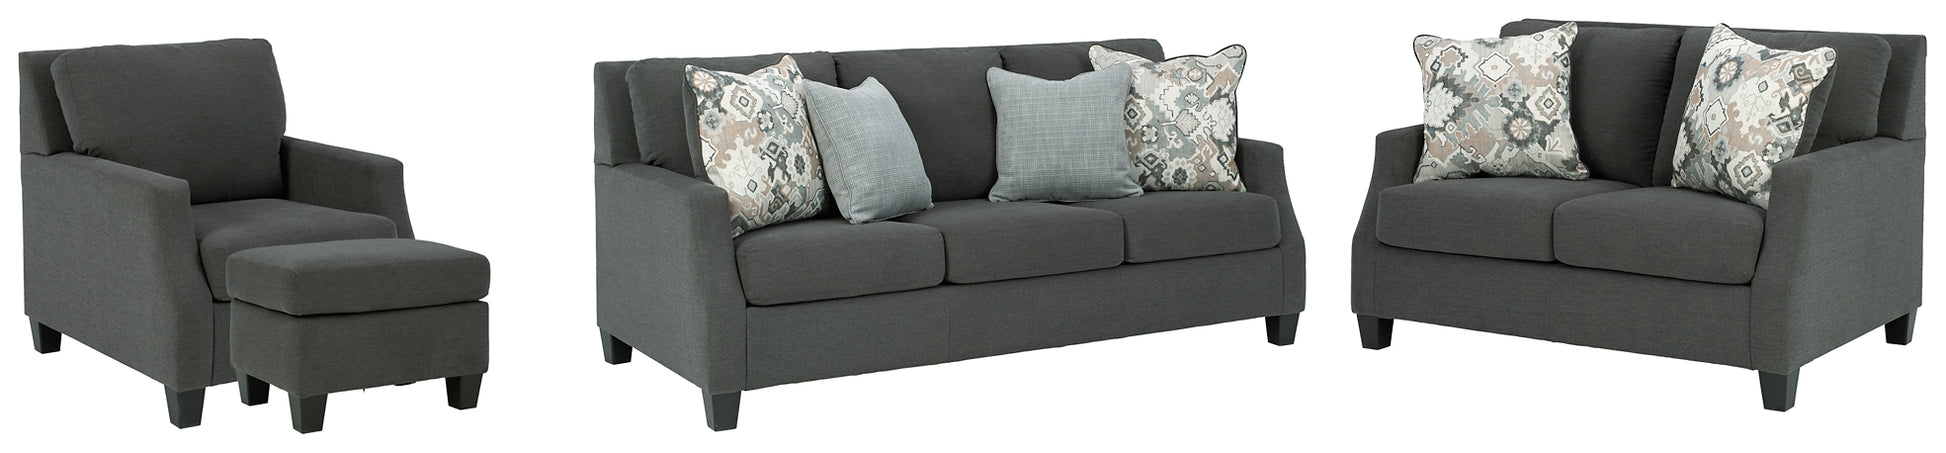 Bayonne Sofa, Loveseat, Chair and Ottoman Signature Design by Ashley®